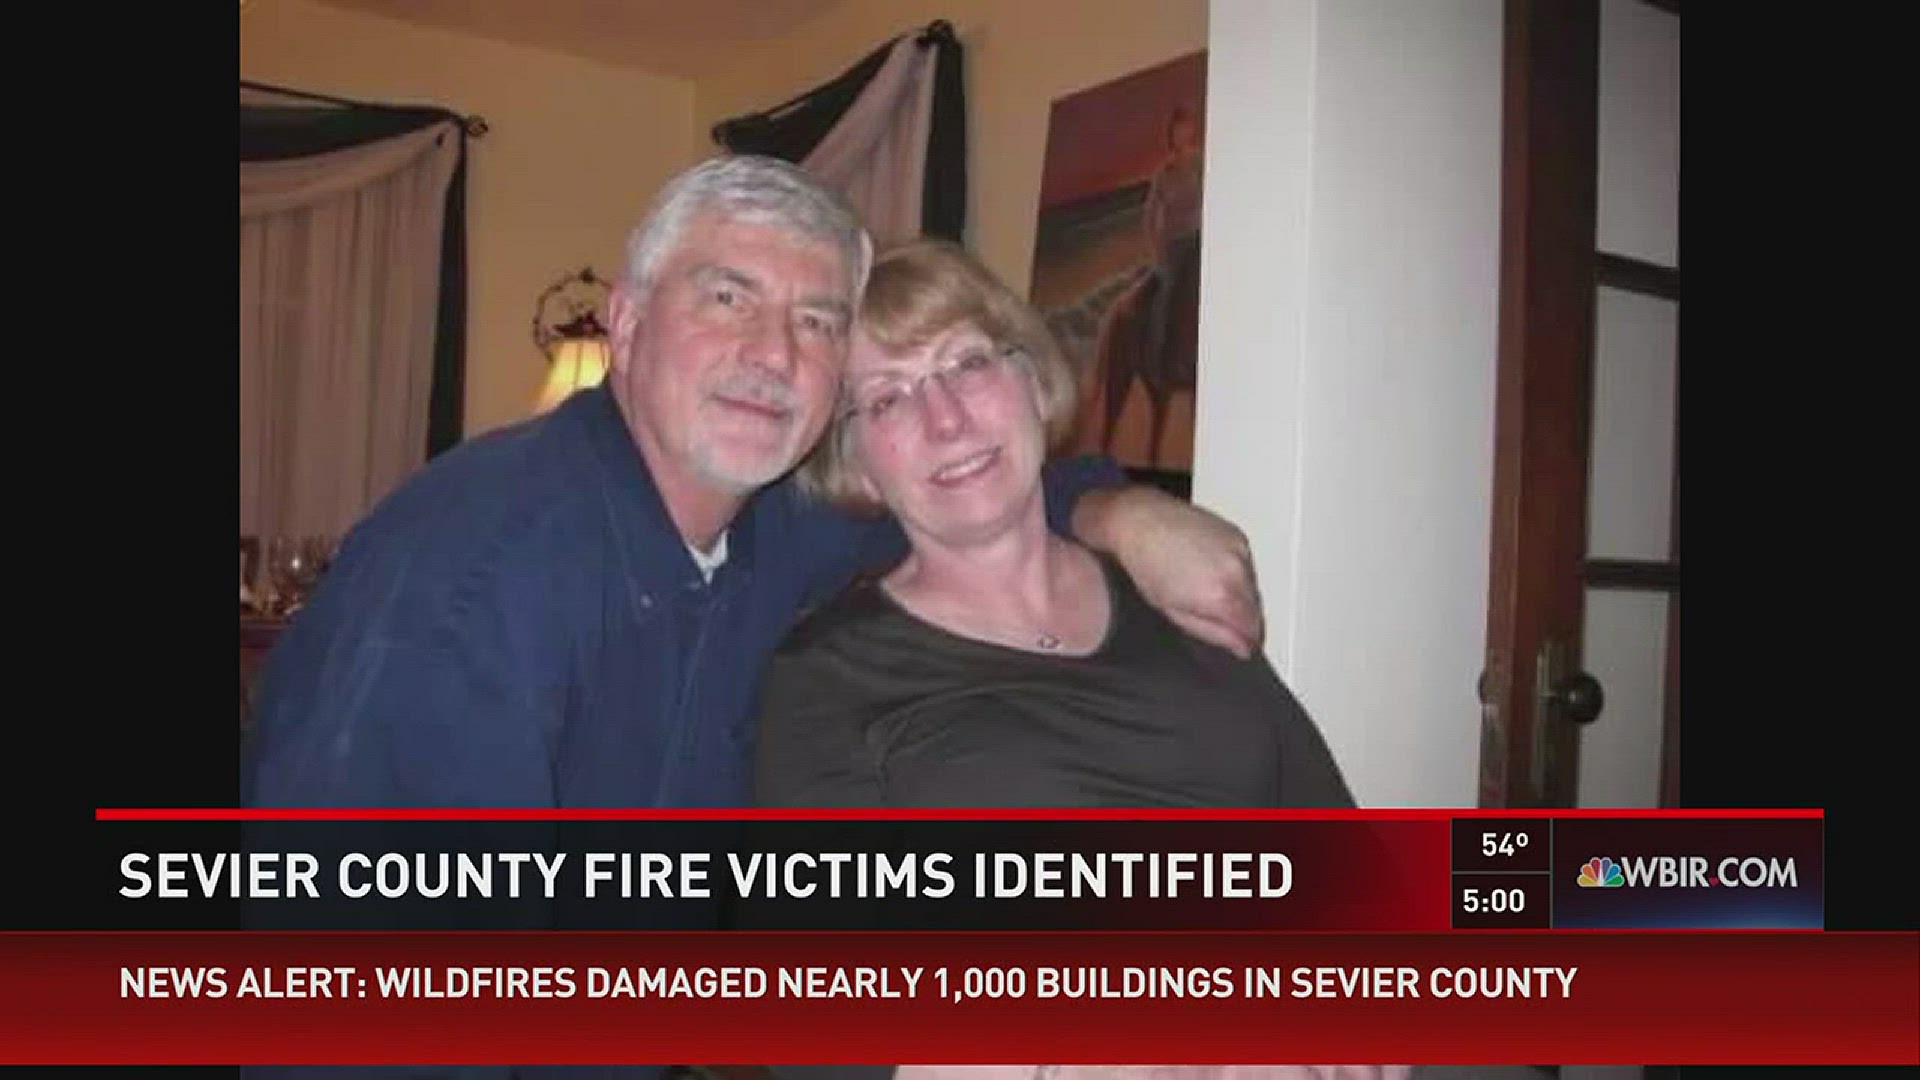 John and Marilyn Tegler were at their vacation home in the Smoky Mountains and did not escape the fire.